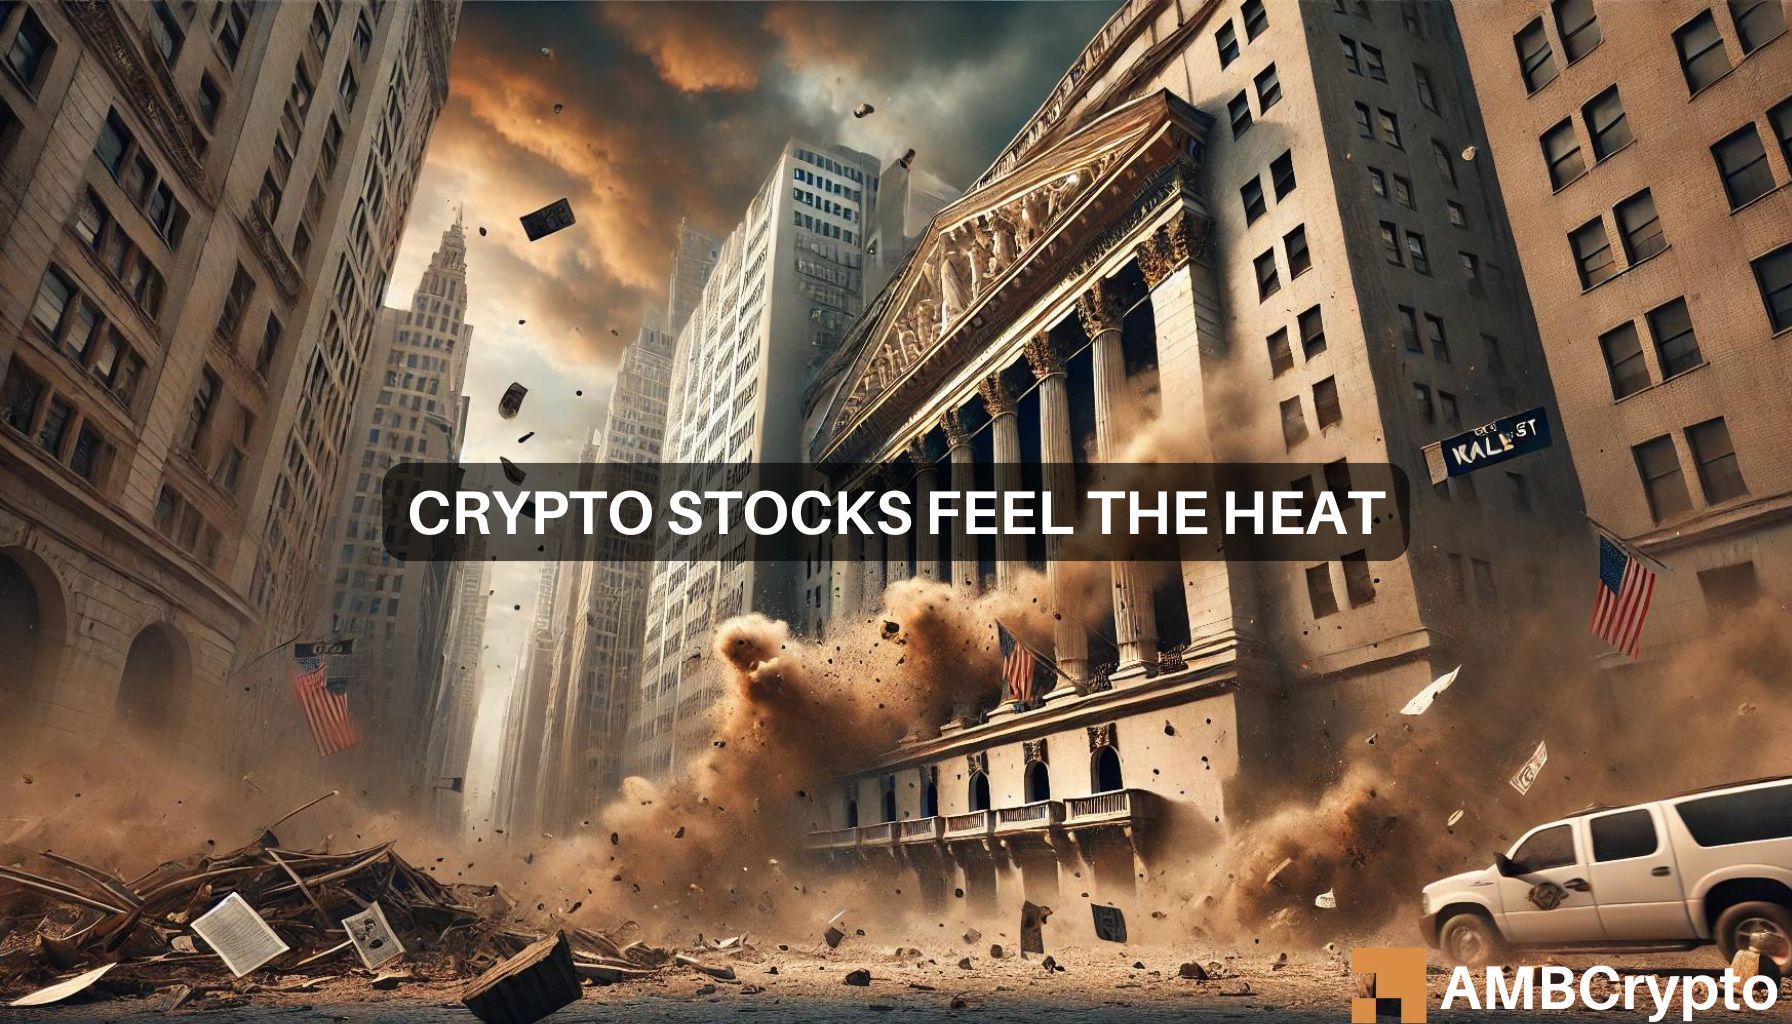 Crypto stocks log double-digit losses as market crash intensifies – What now?